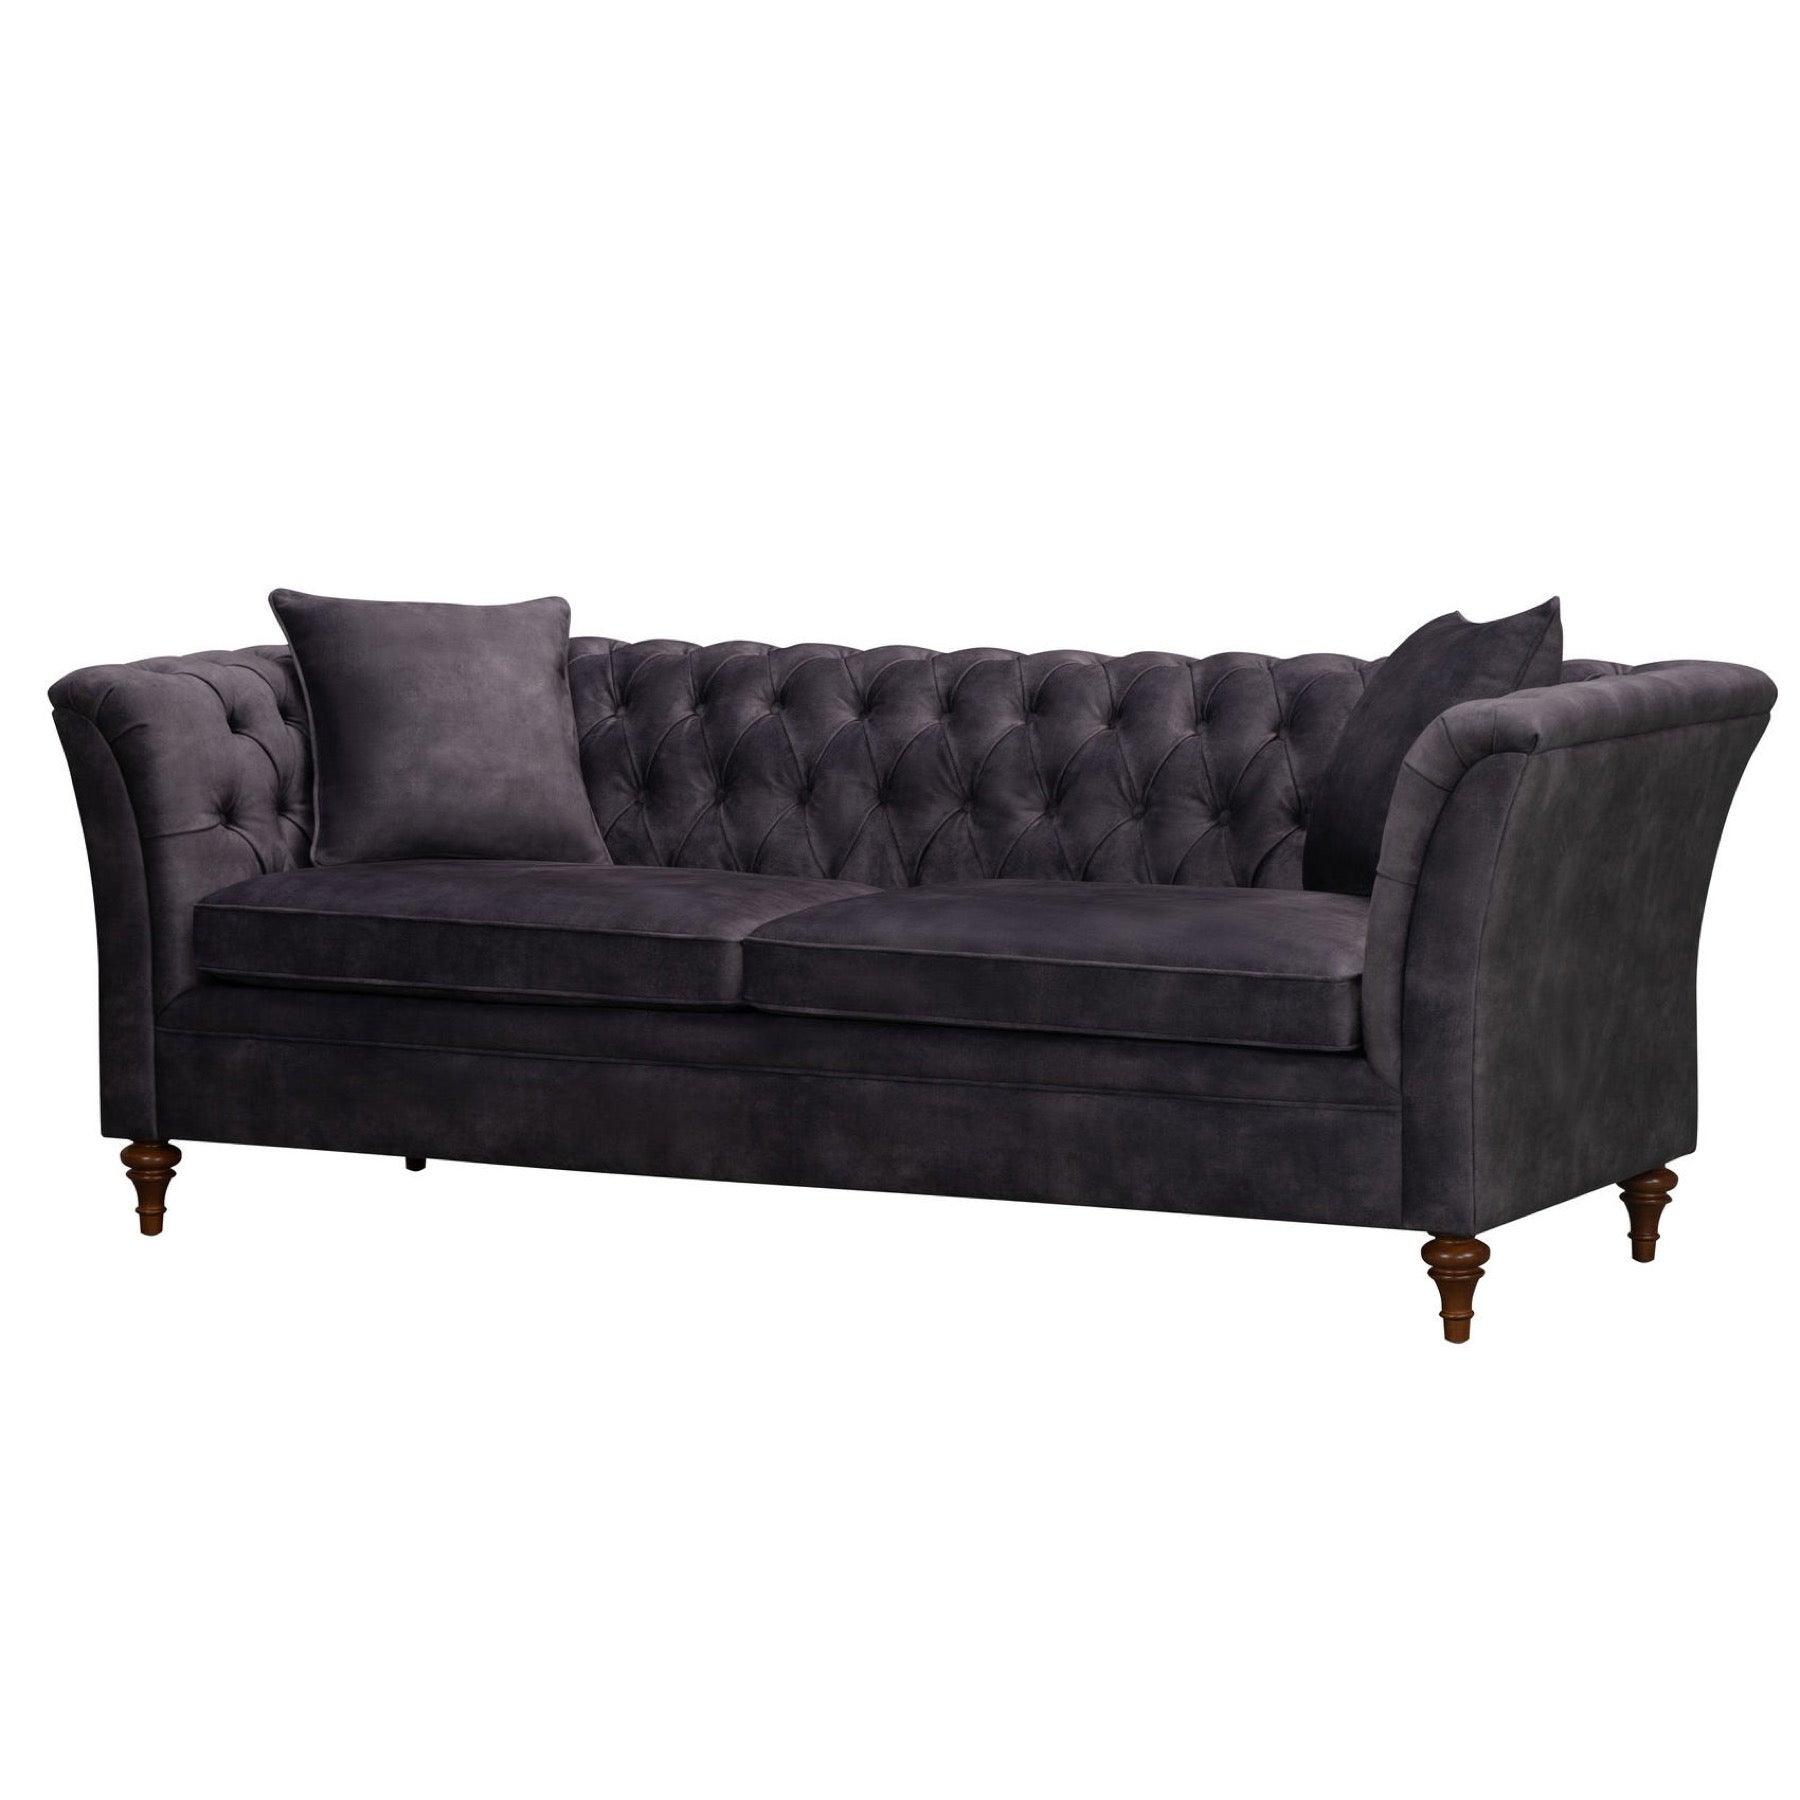 Chatsworth Button Pressed Three Seater Sofa - Vookoo Lifestyle